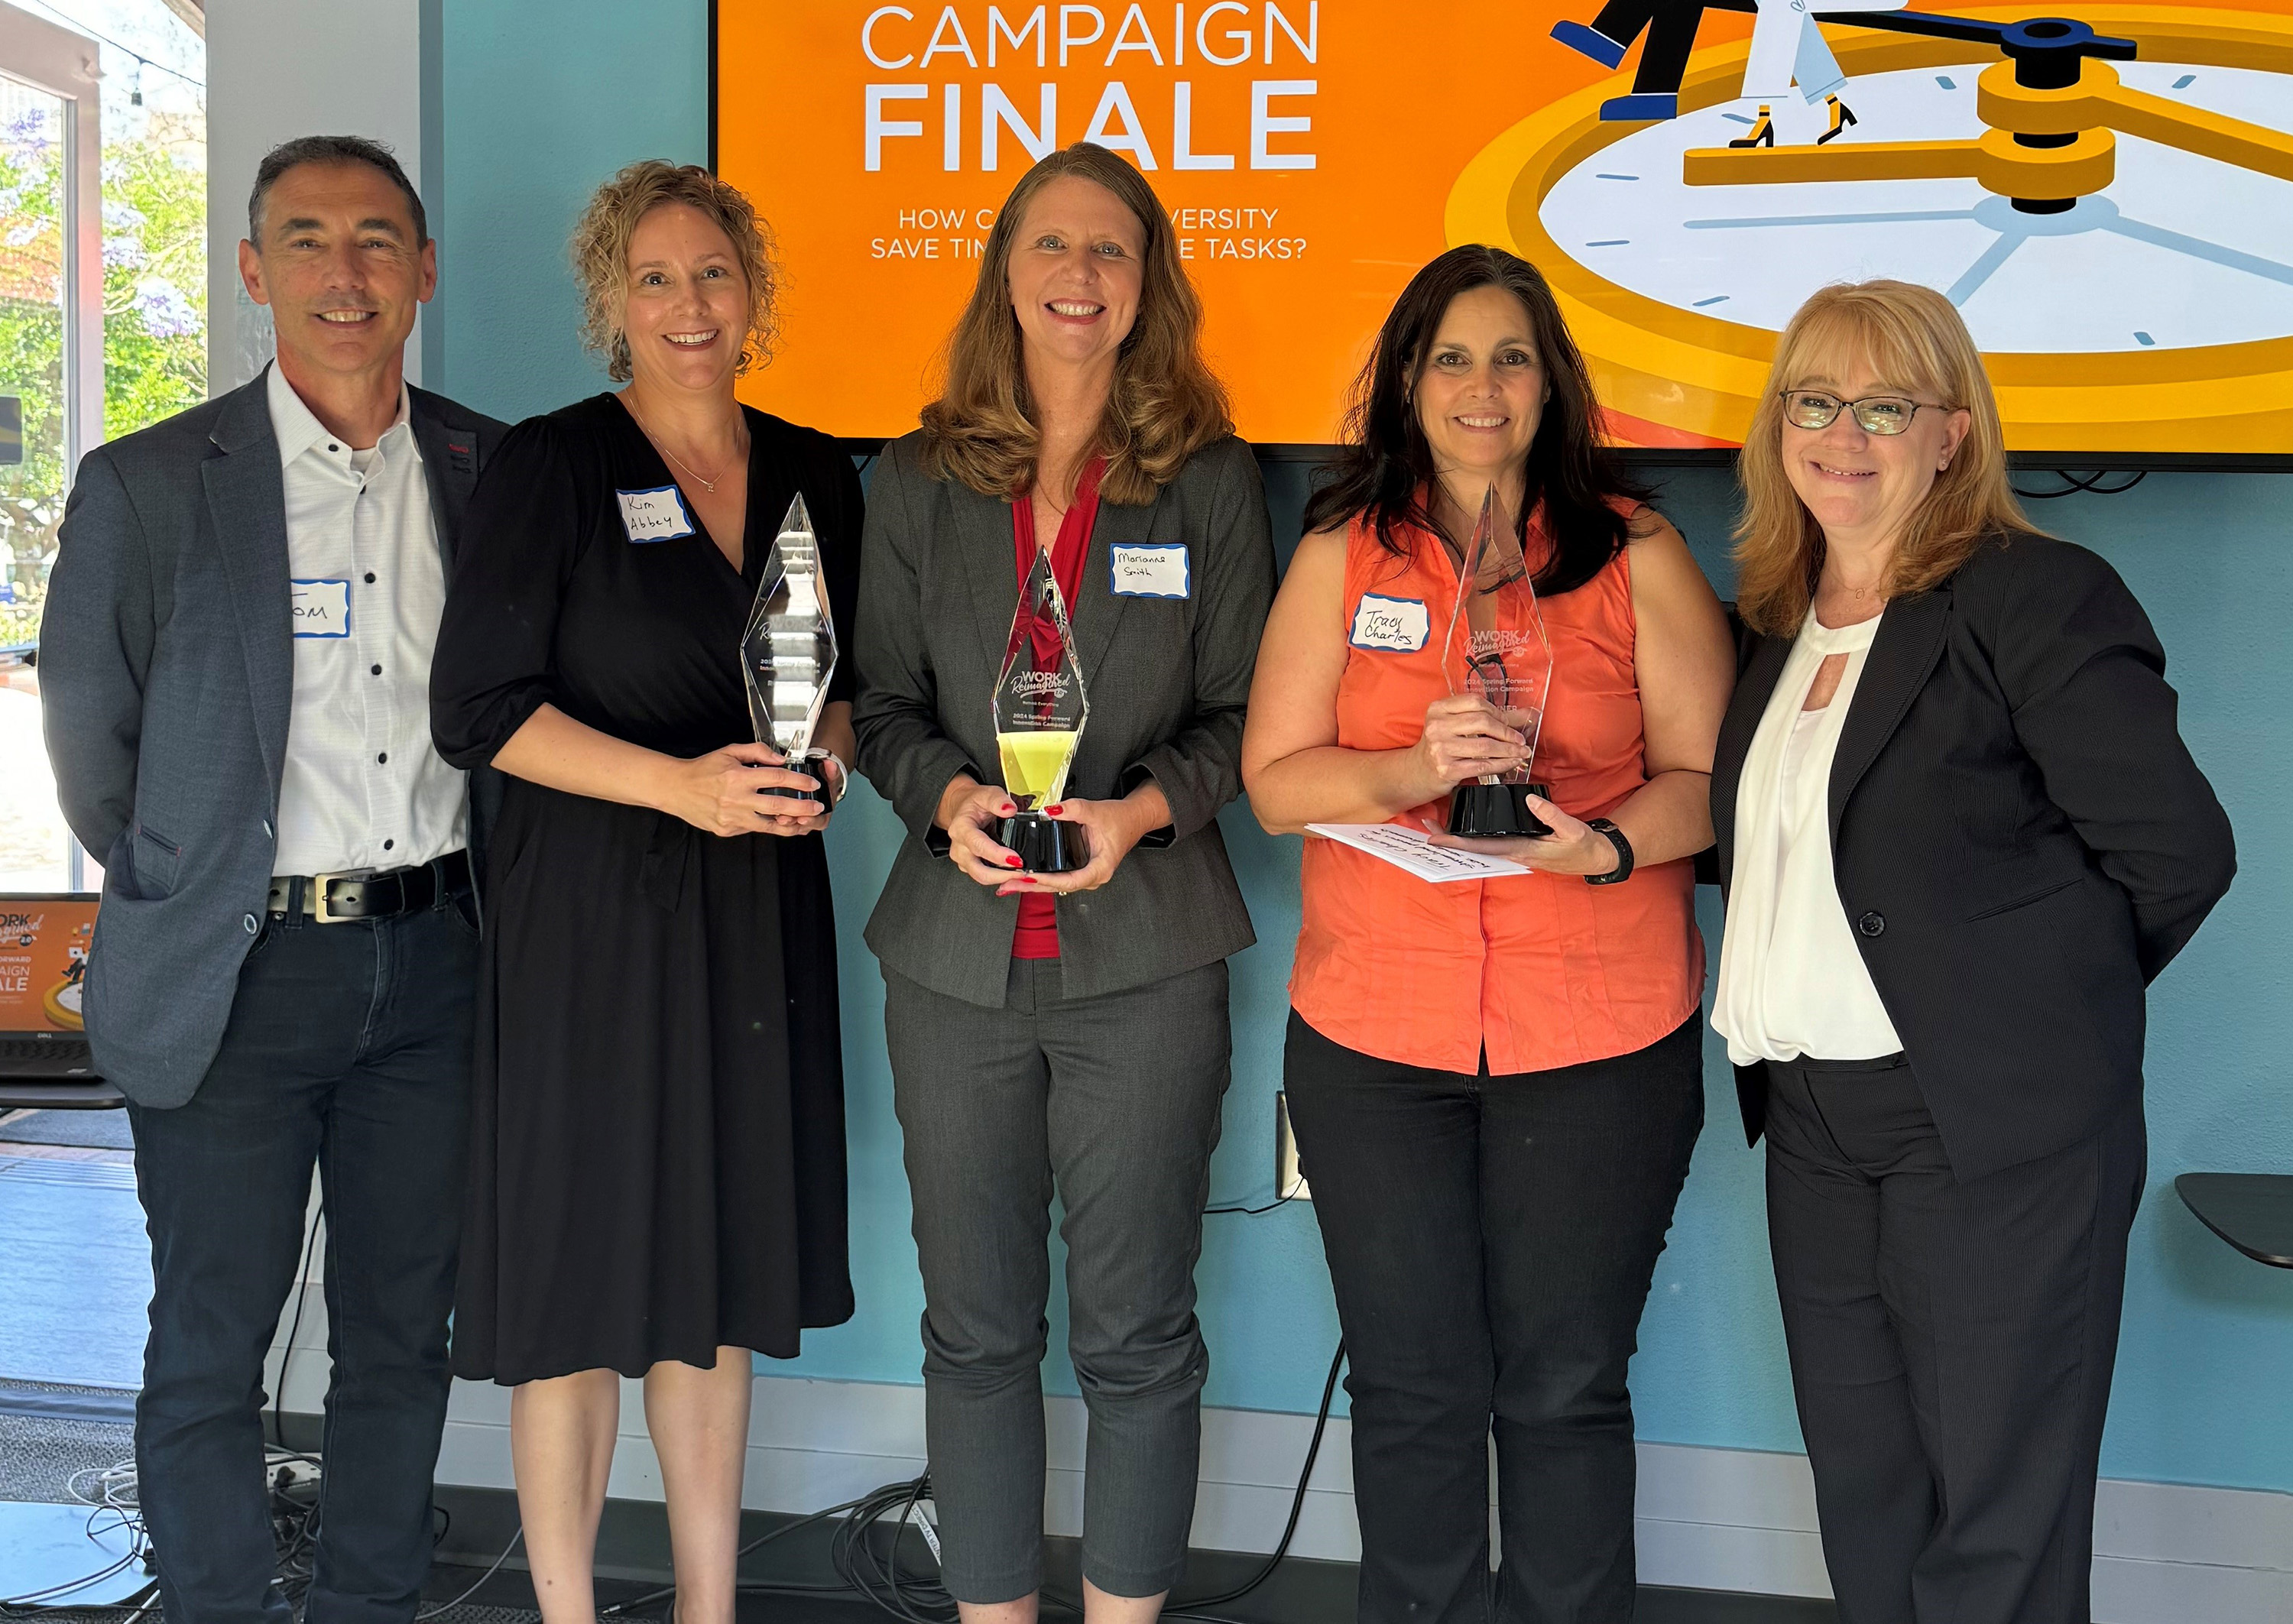 Spring Forward participants (left to right) Kim Abbey, Marianne Smith, and Tracy Charles hold their awards next to Tom Andriola and Ramona Agrela